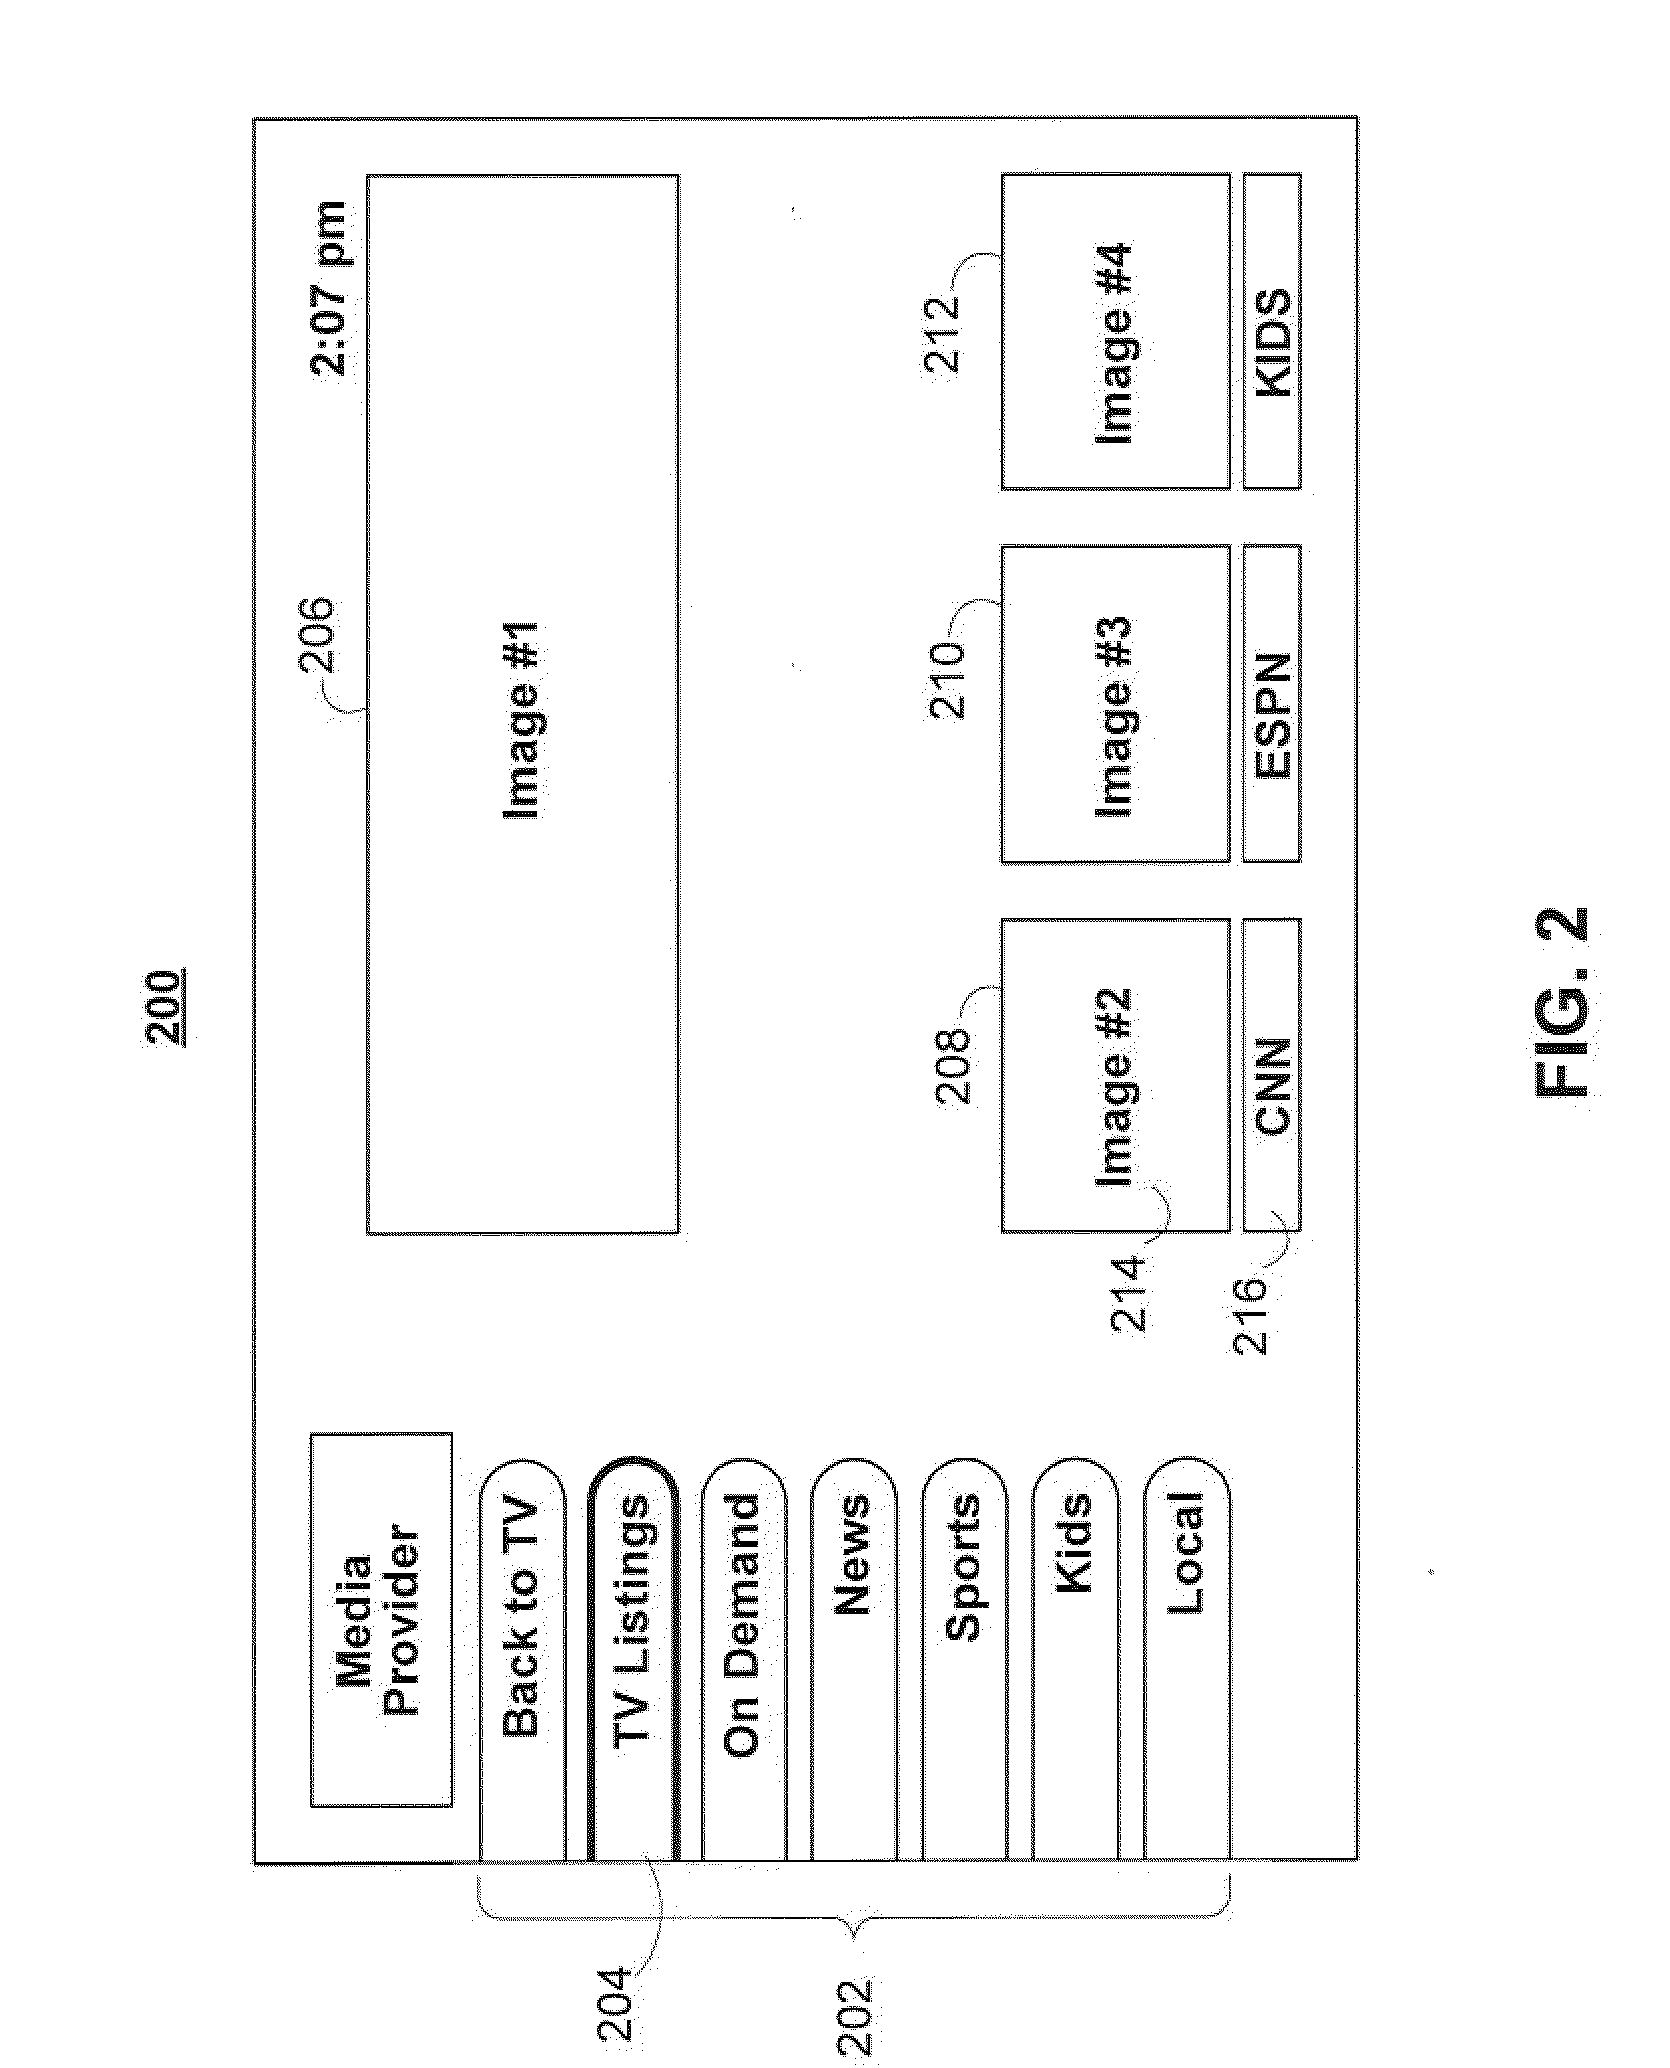 Systems and methods for providing reminders associated with detected users